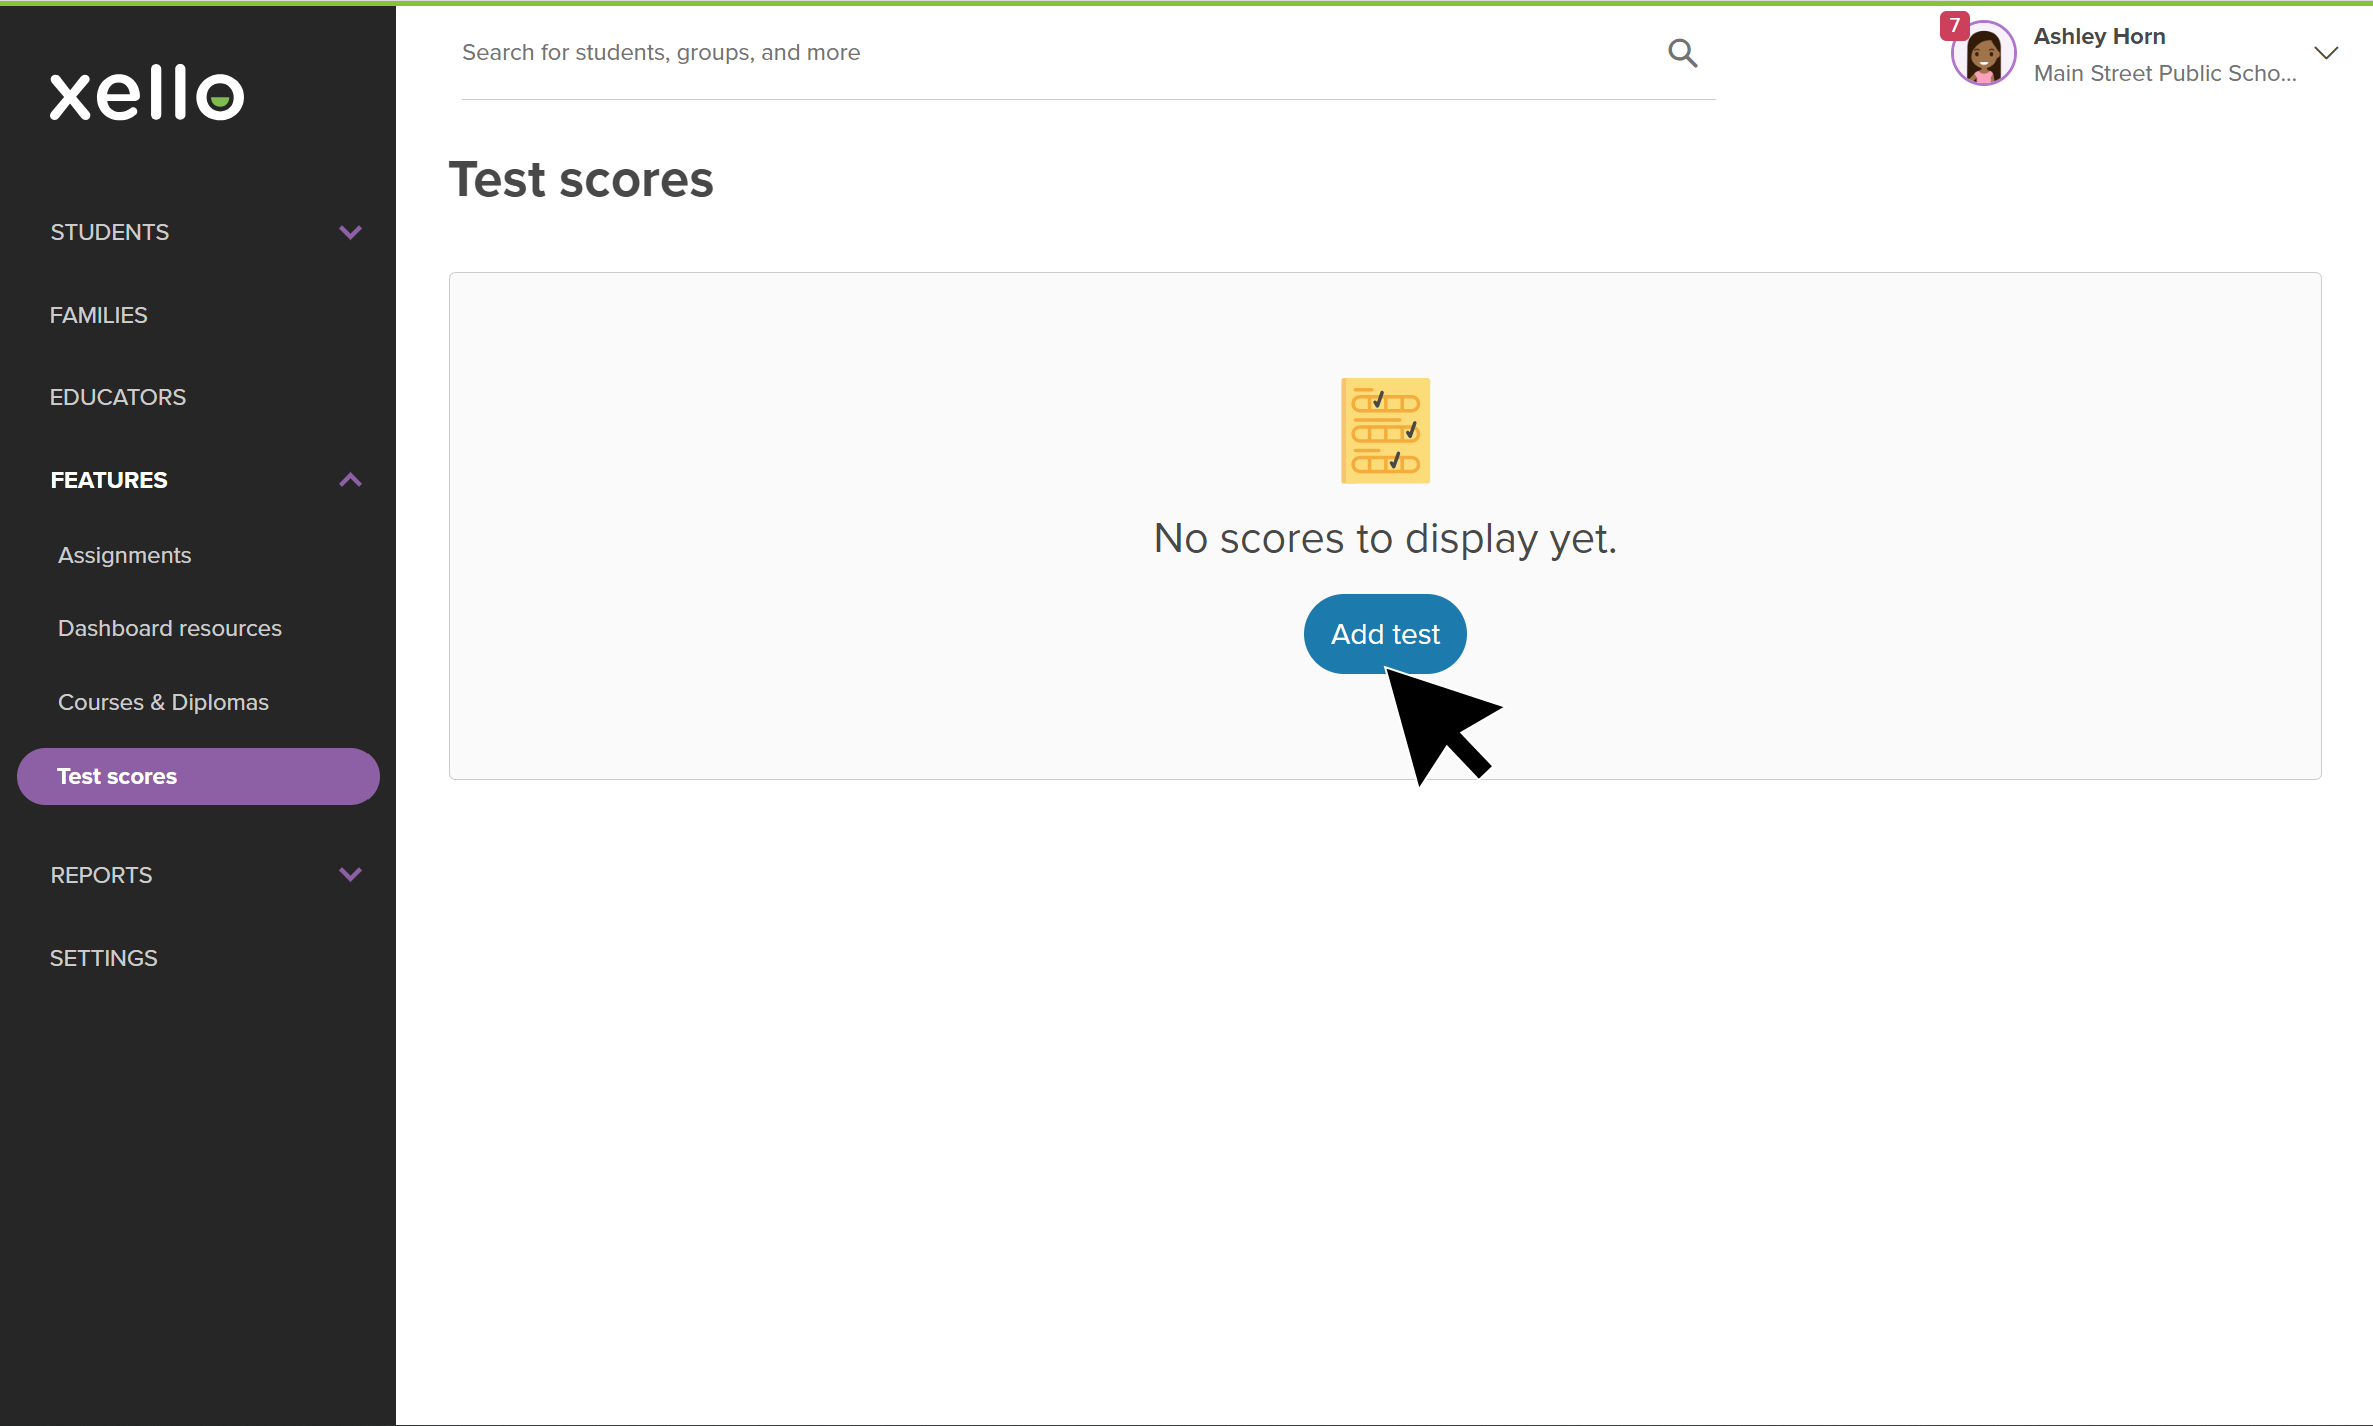 Student test score landing page in Xello with four tests. Each test has a region, the number of students with their scores uploaded, and the last dated update